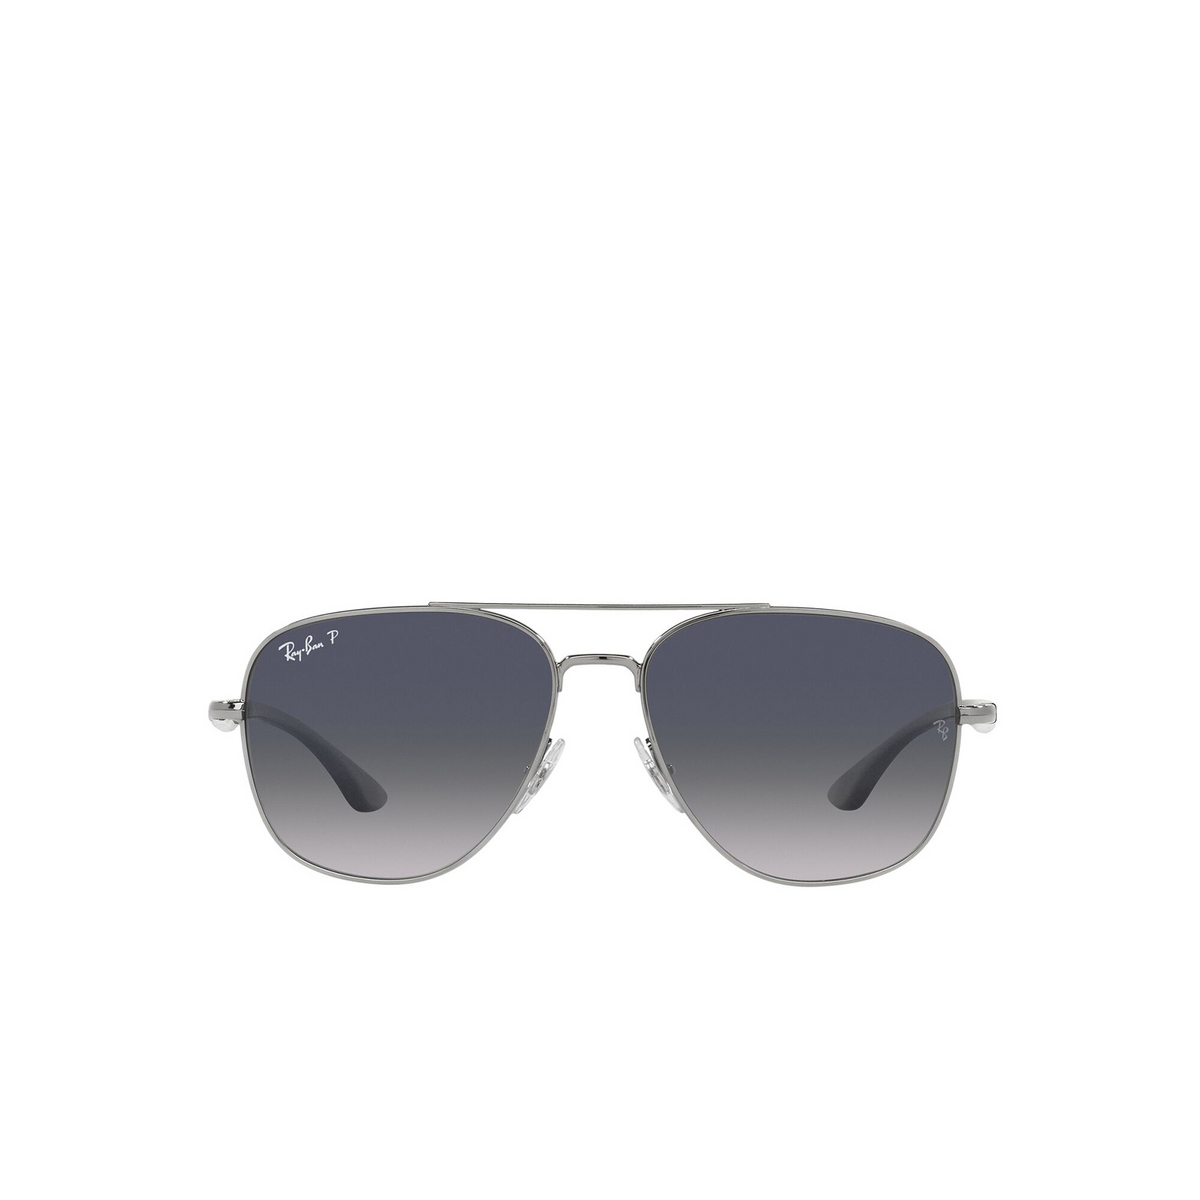 Ray-Ban® Square Sunglasses: RB3683 color Gunmetal 004/78 - front view.